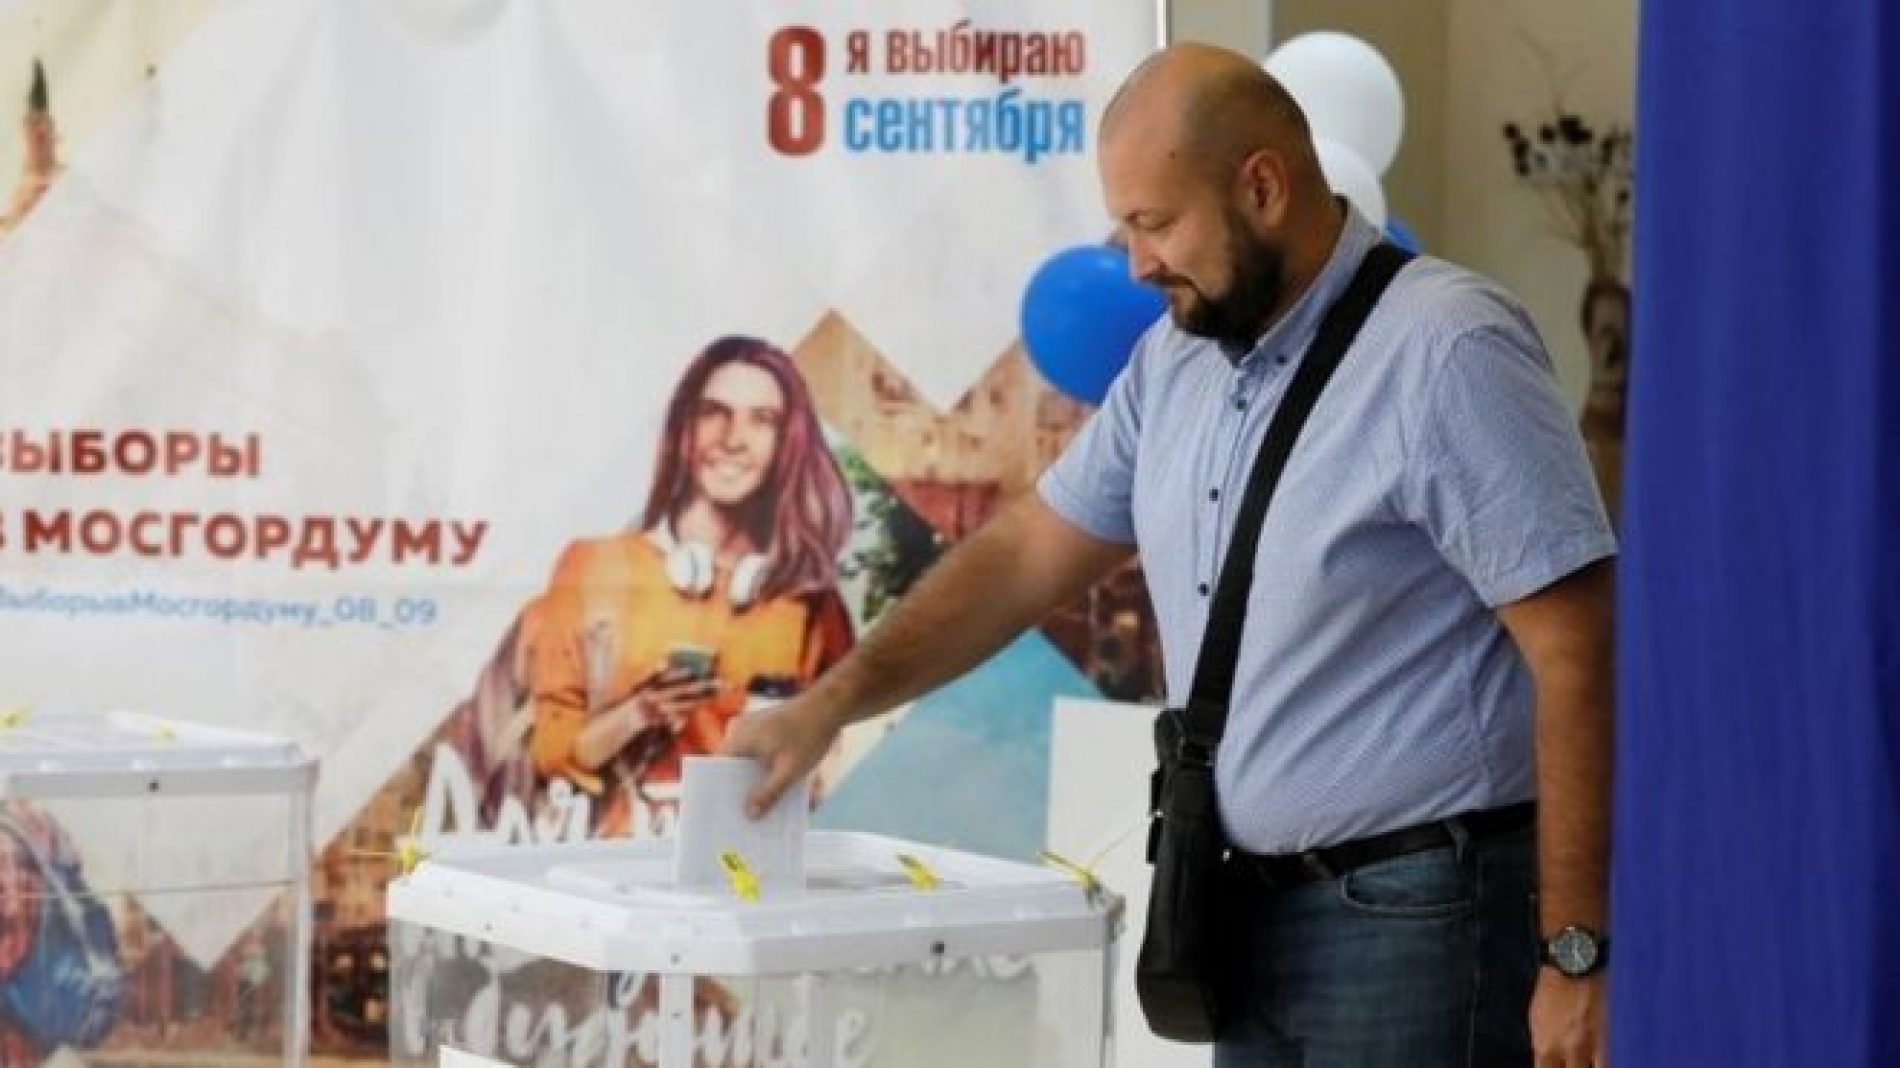 BBC-Russia’s ruling party hit badly in Moscow election